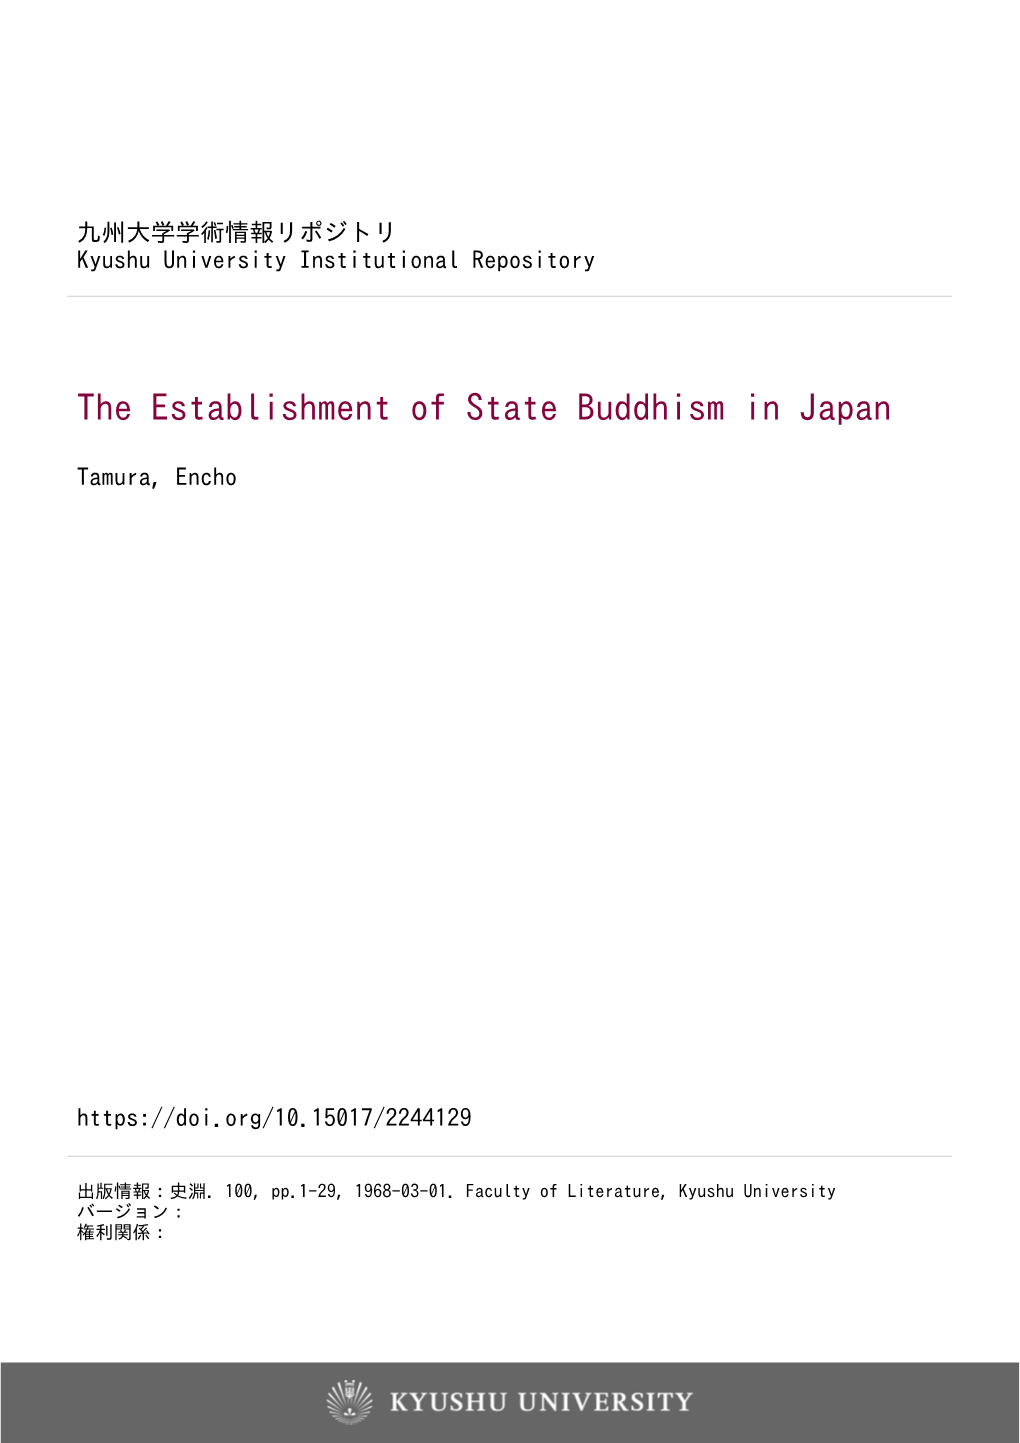 The Establishment of State Buddhism in Japan